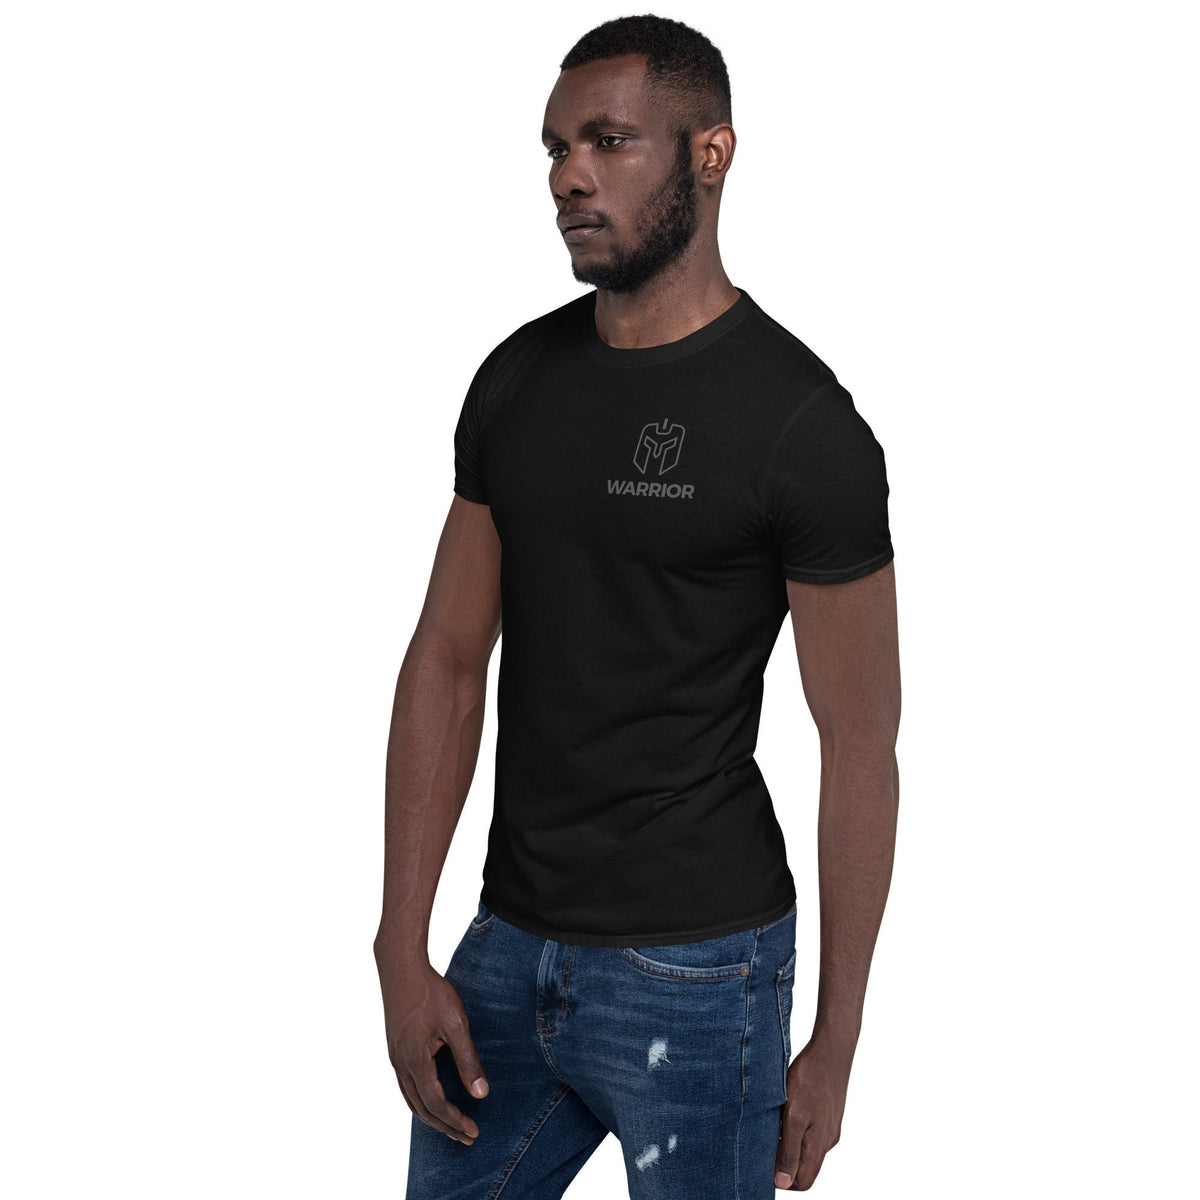 Te futueo et caballum tuum (Latin-F@*k You And The Horse You Rode In On) Warrior Short-Sleeve Unisex T-Shirt